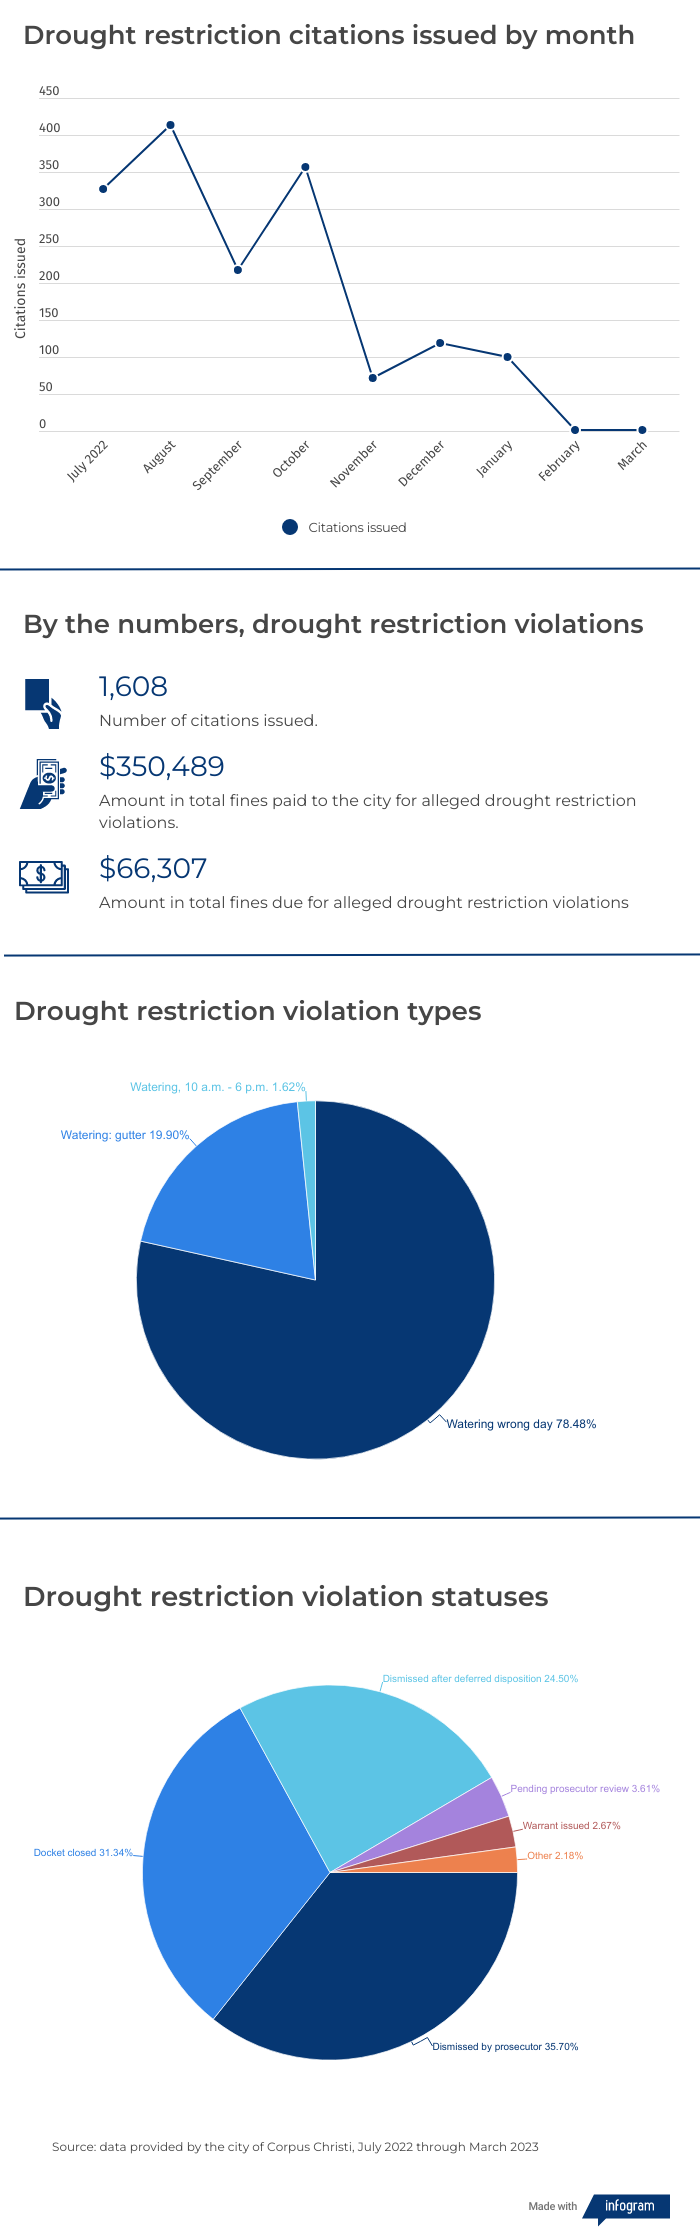 Municipal Court data shows the type and number of drought restriction violation citations.